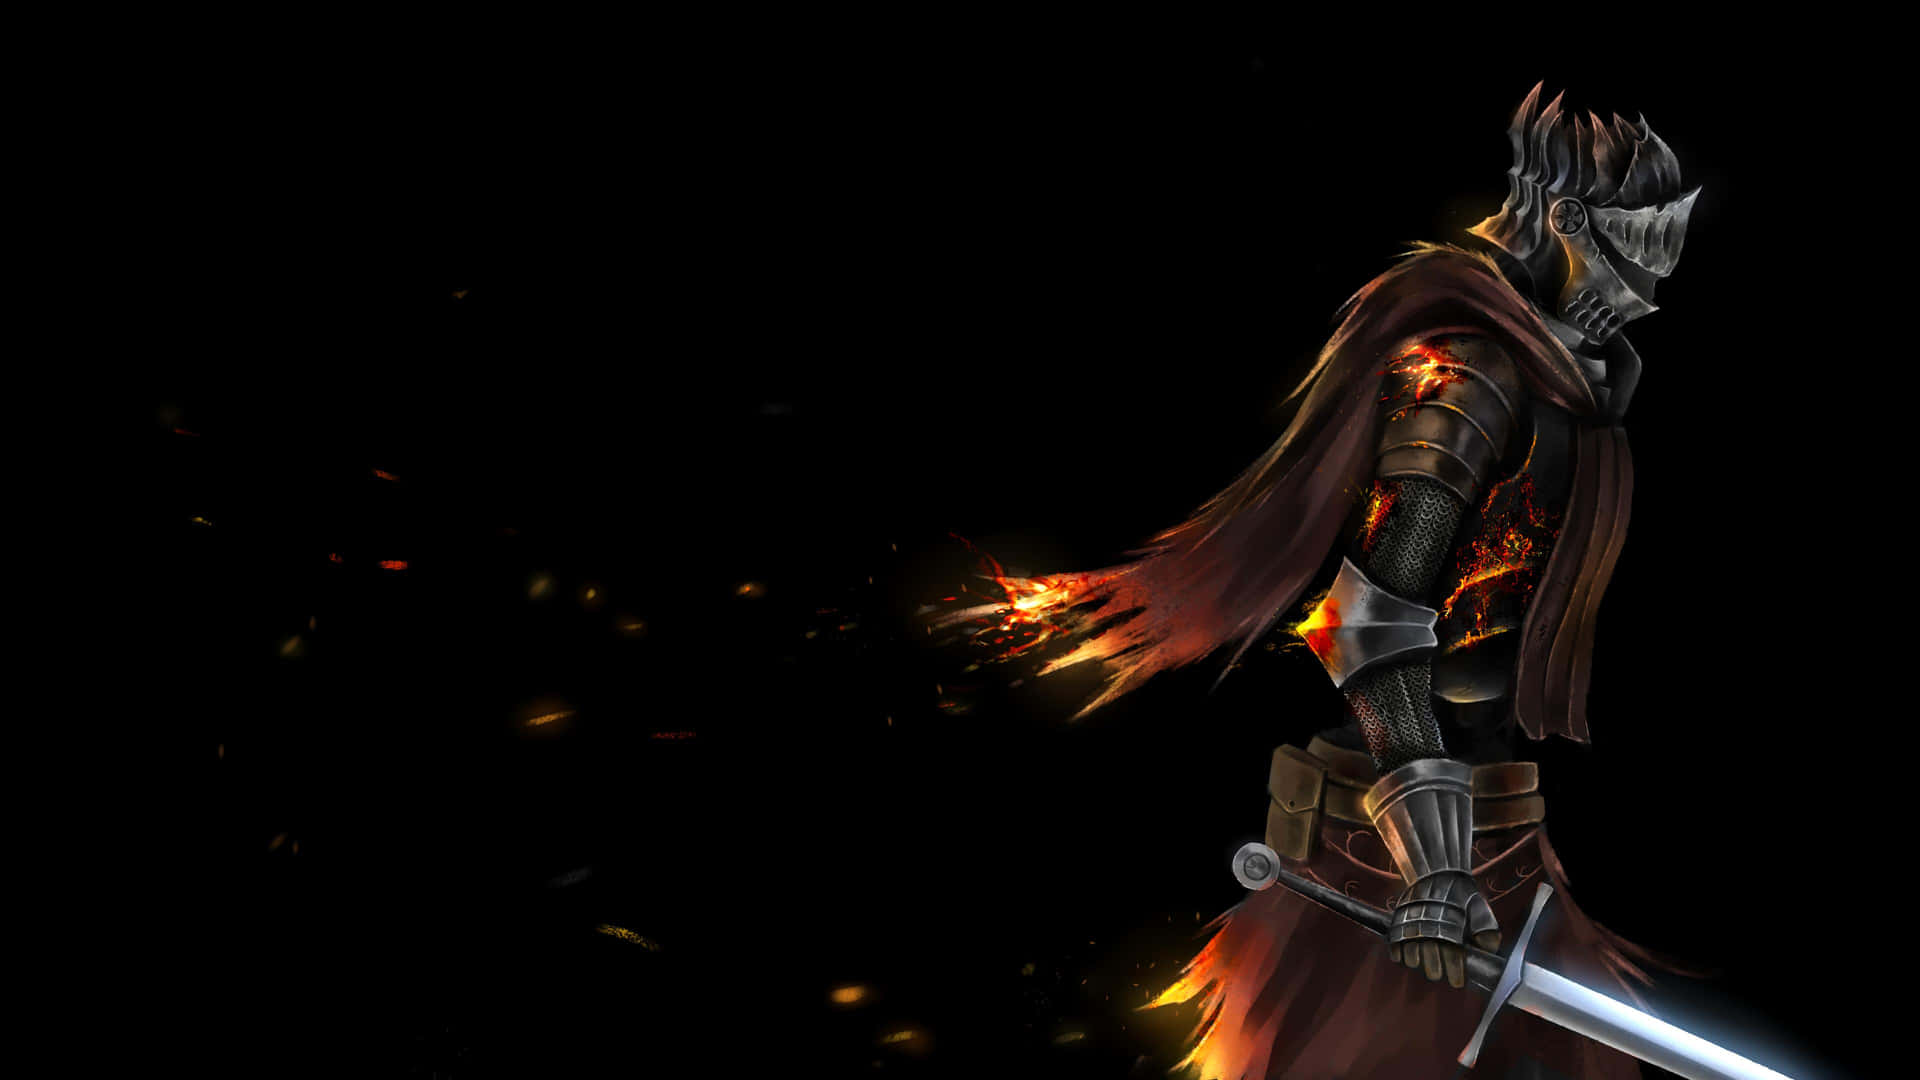 A Man With A Sword And Flames On A Black Background Wallpaper